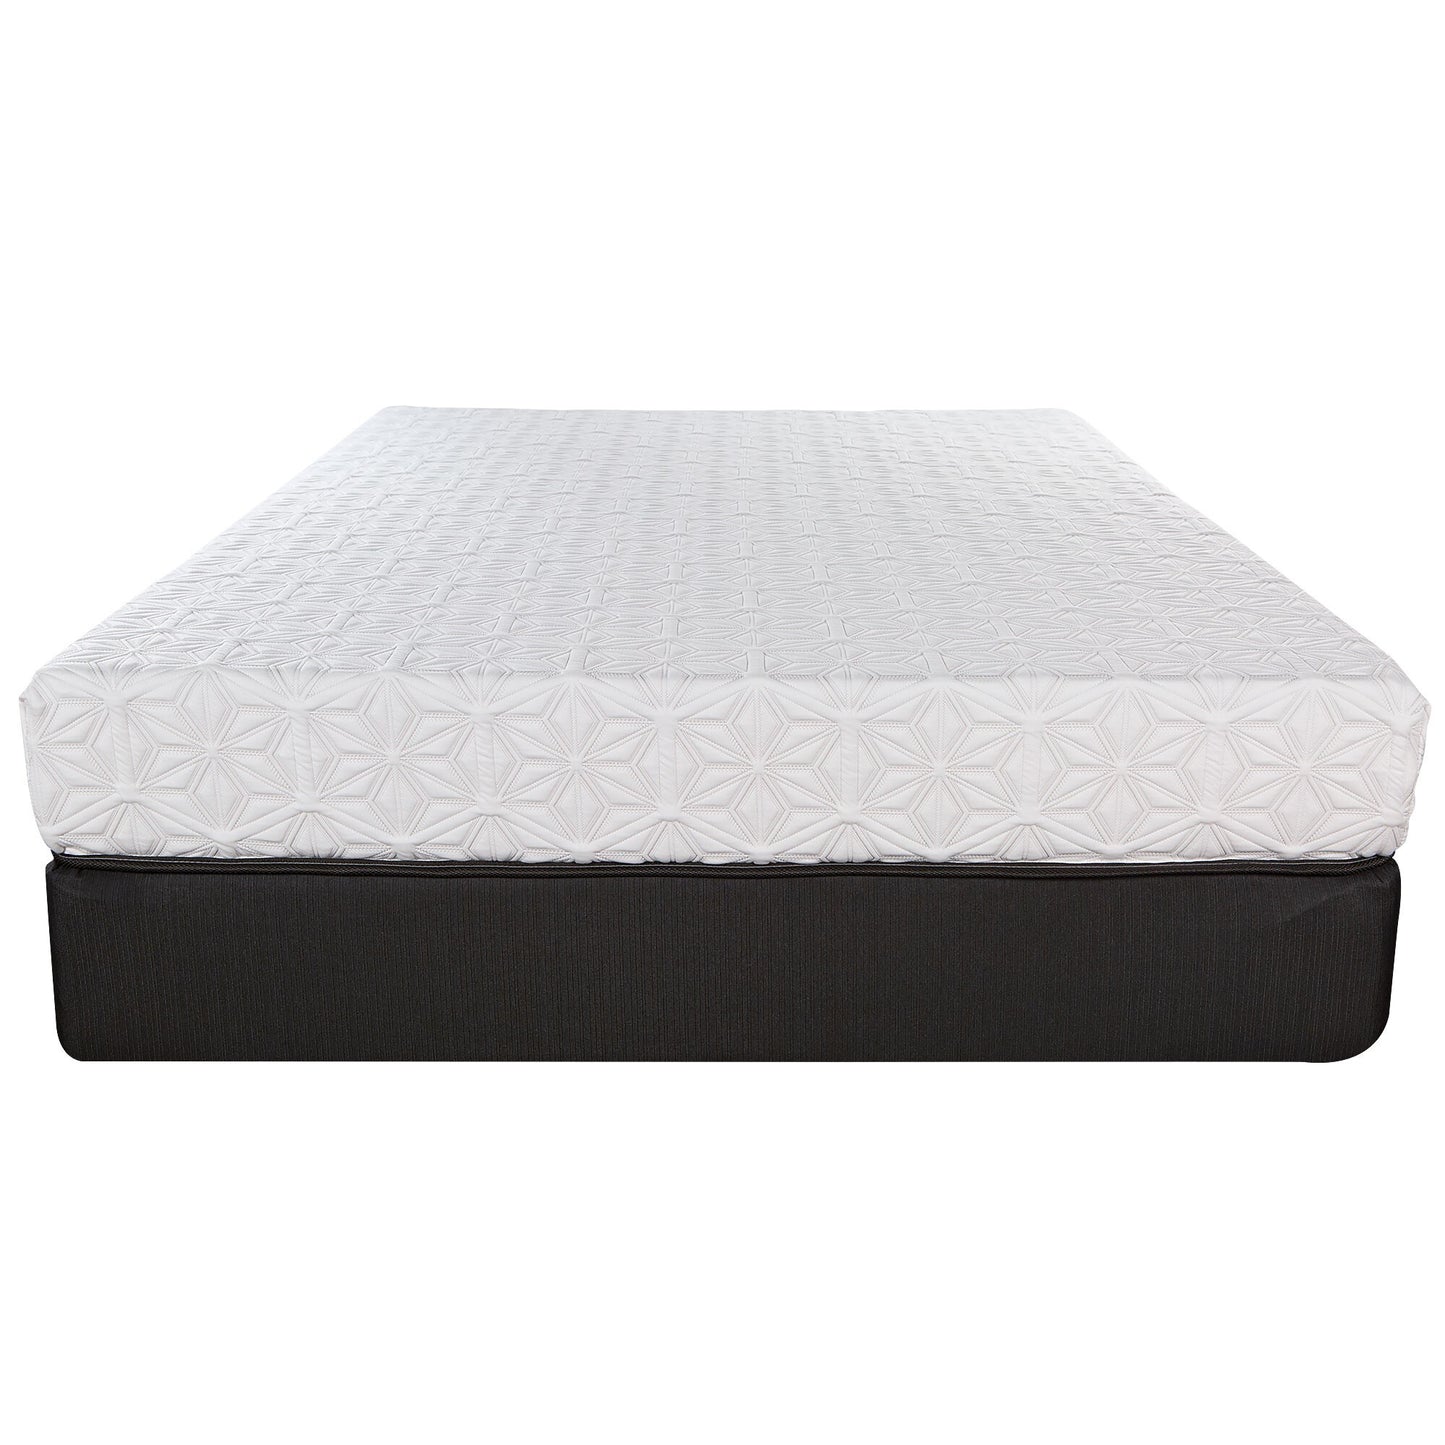 8' Three Layer Gel Infused Memory Foam Smooth Top Mattress  Queen